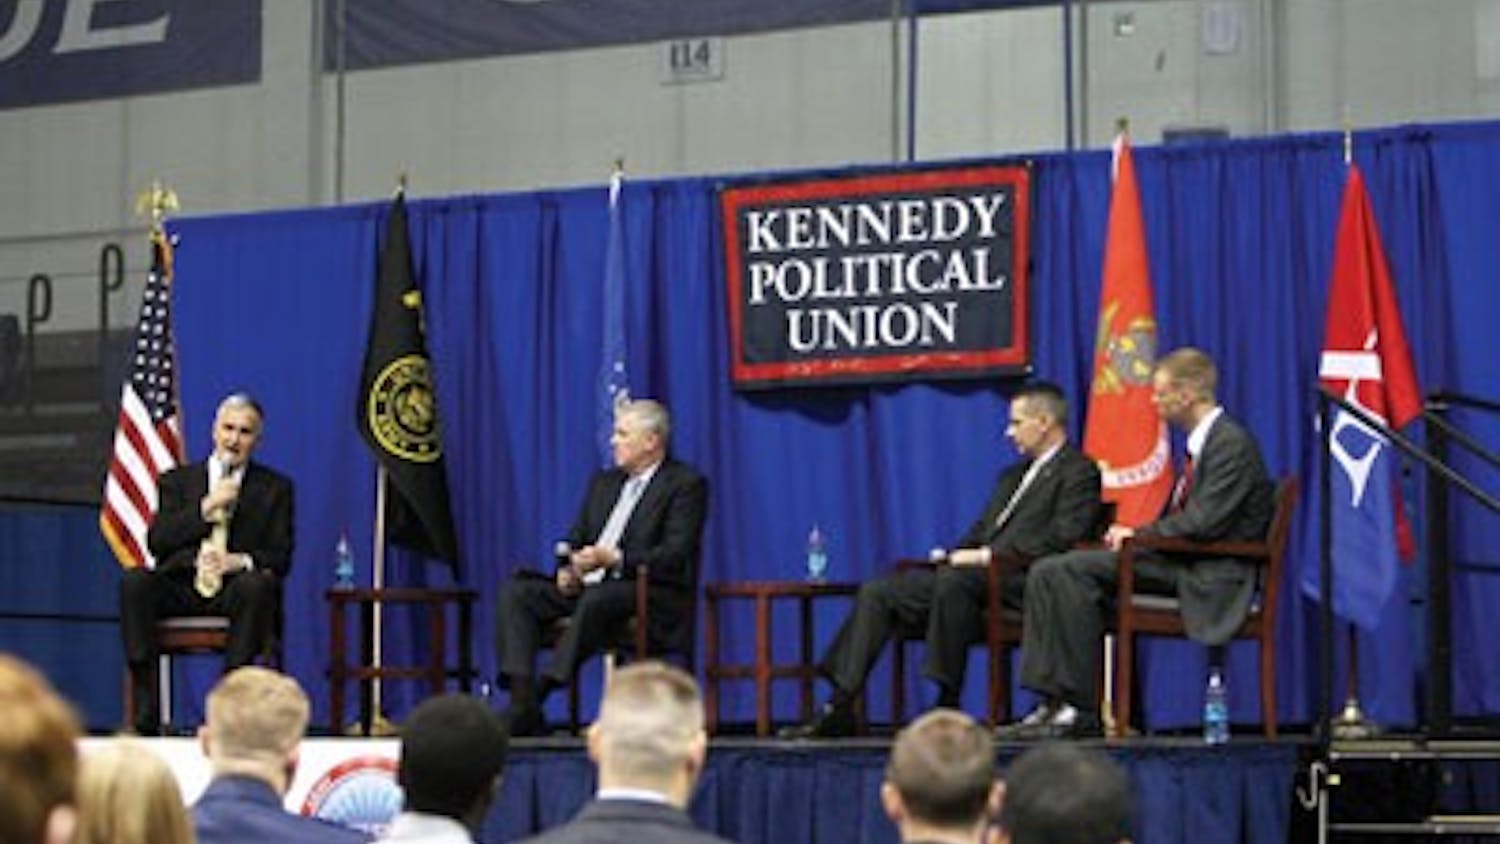 JOINTLY SPEAKING â€” Gen. Hugh Shelton speaks at a KPU event with, from left to right, Gens. Richard Myers and Peter Pace. KPU Director and Marine Reserve member Will Hubbard looks on from the right. The generals are all former chairmen of the Joint Chiefs of Staff. They spoke to students Monday about veterans and their post-war experiences. 